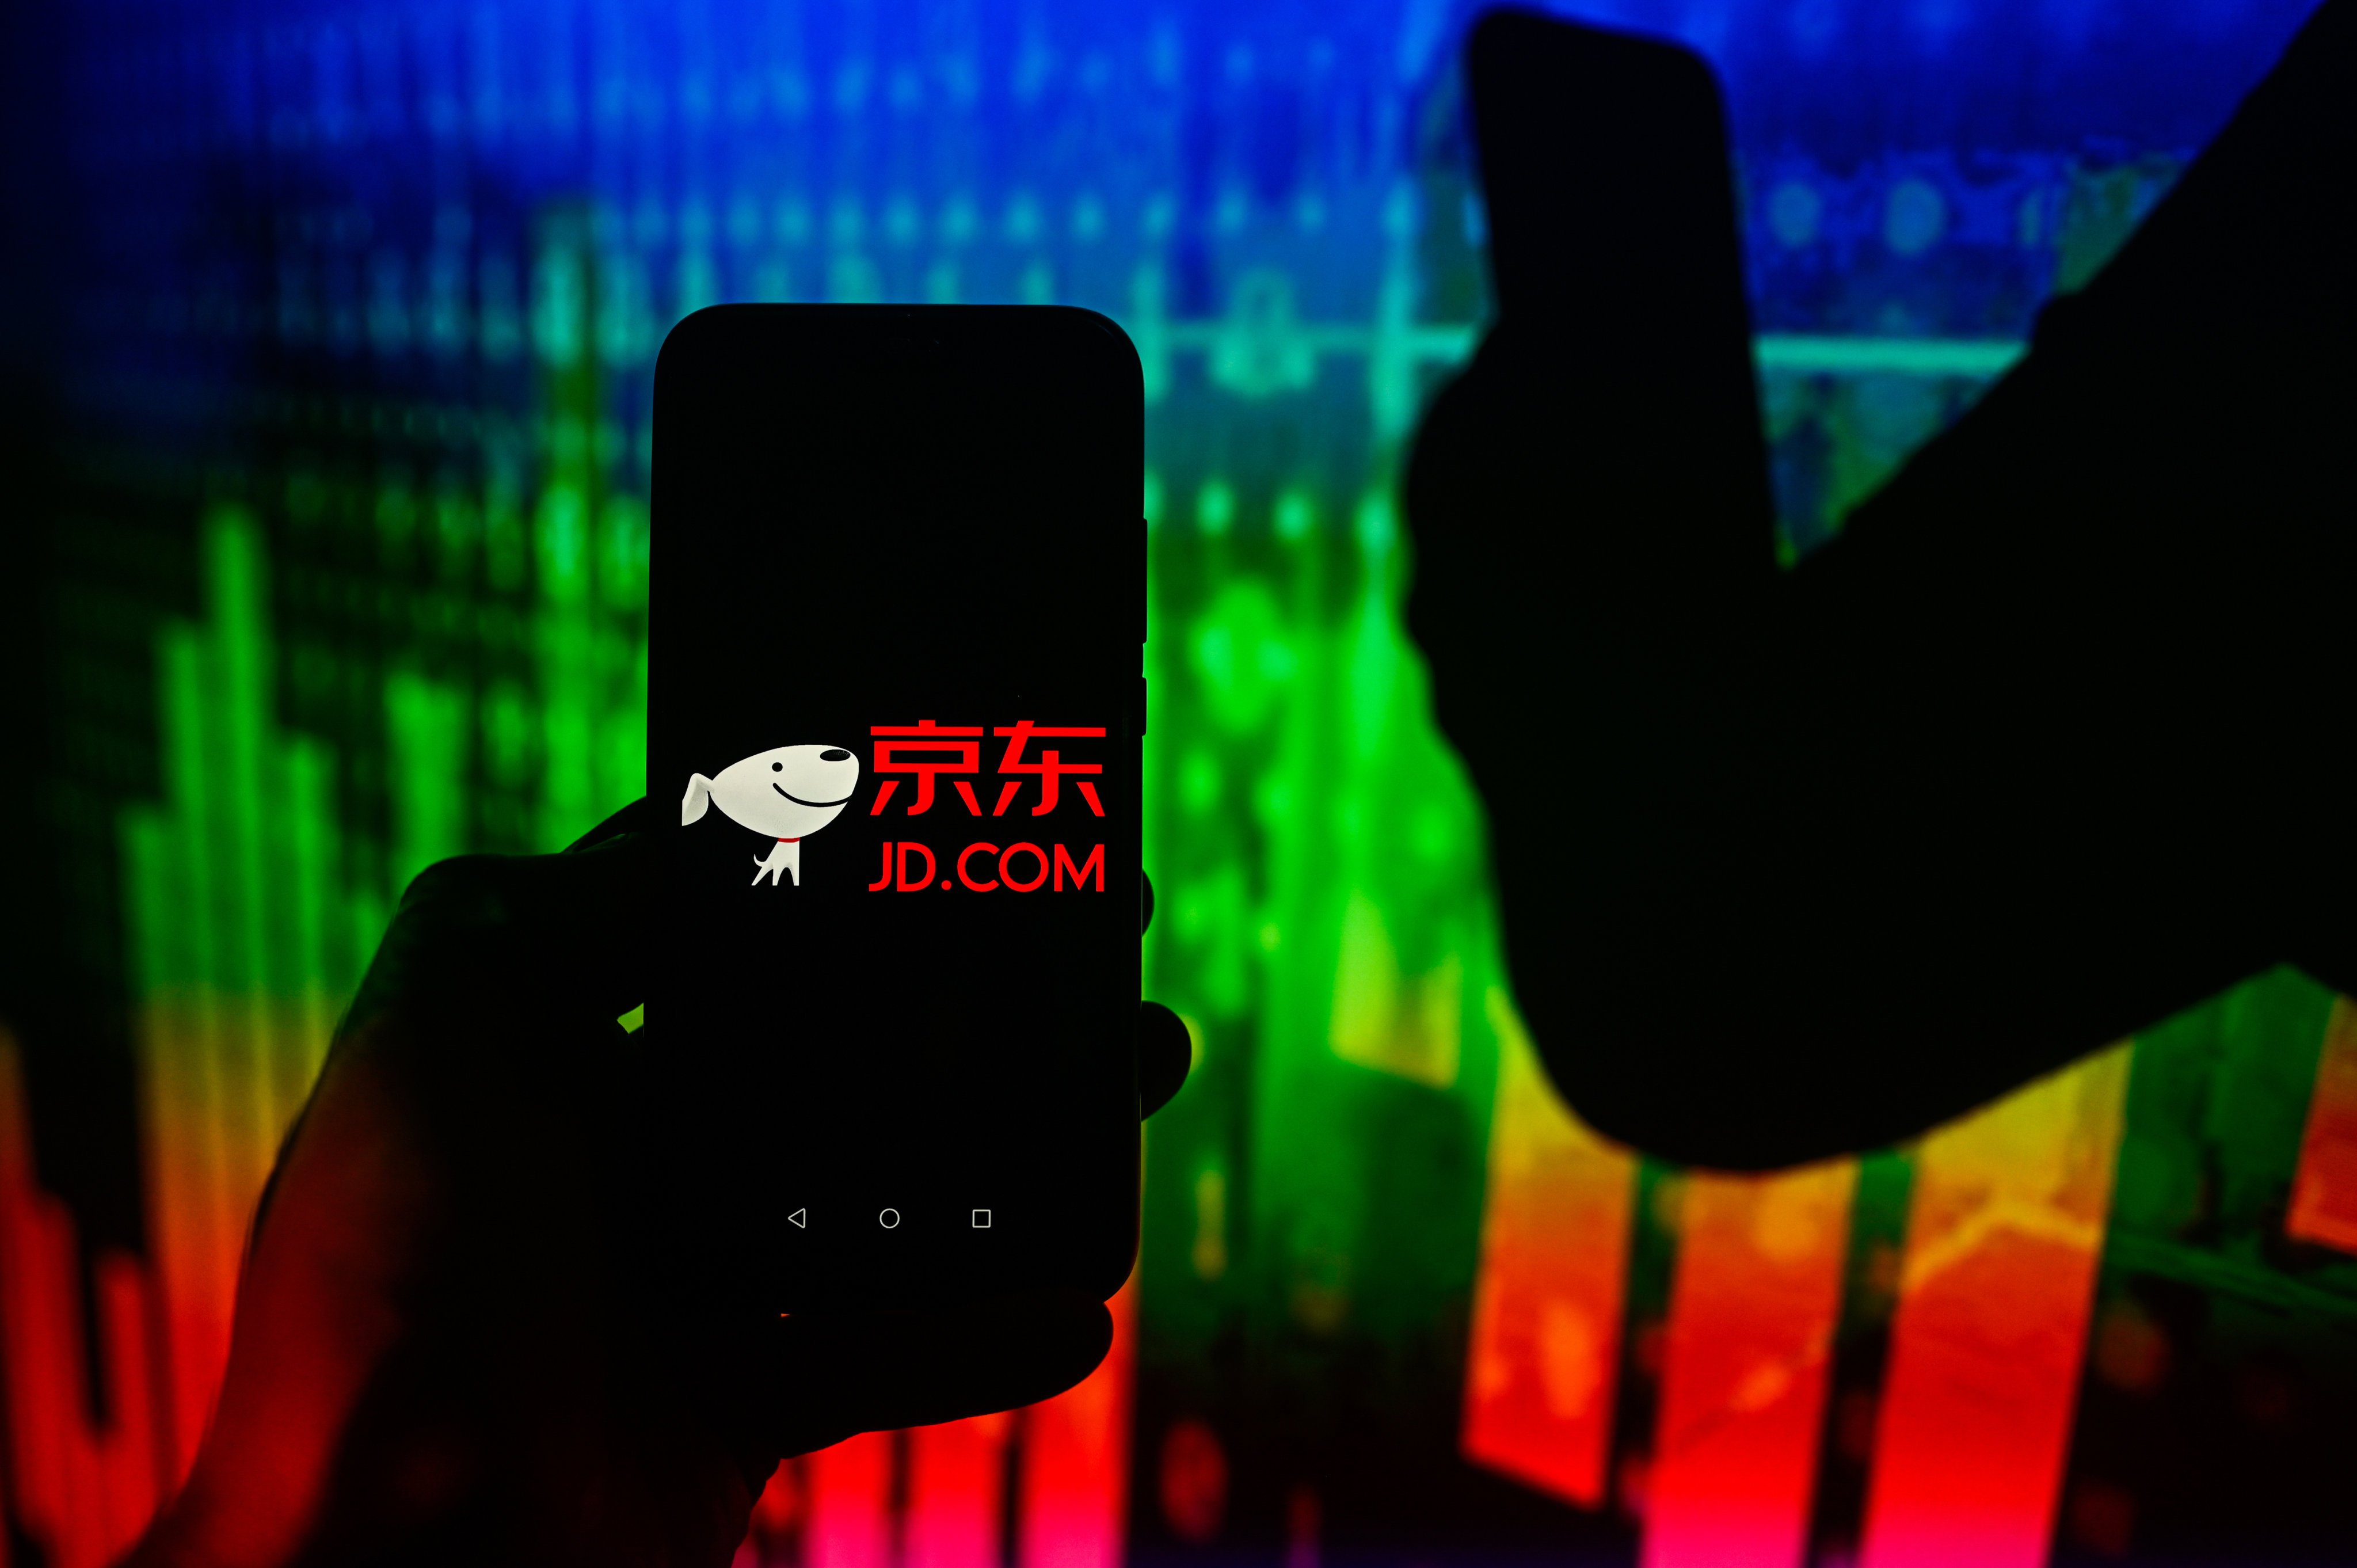 JD.com’s latest quarterly financial results reflect the expansion of China’s online retail market in the first quarter. Photo: SOPA Images/LightRocket via Getty Images